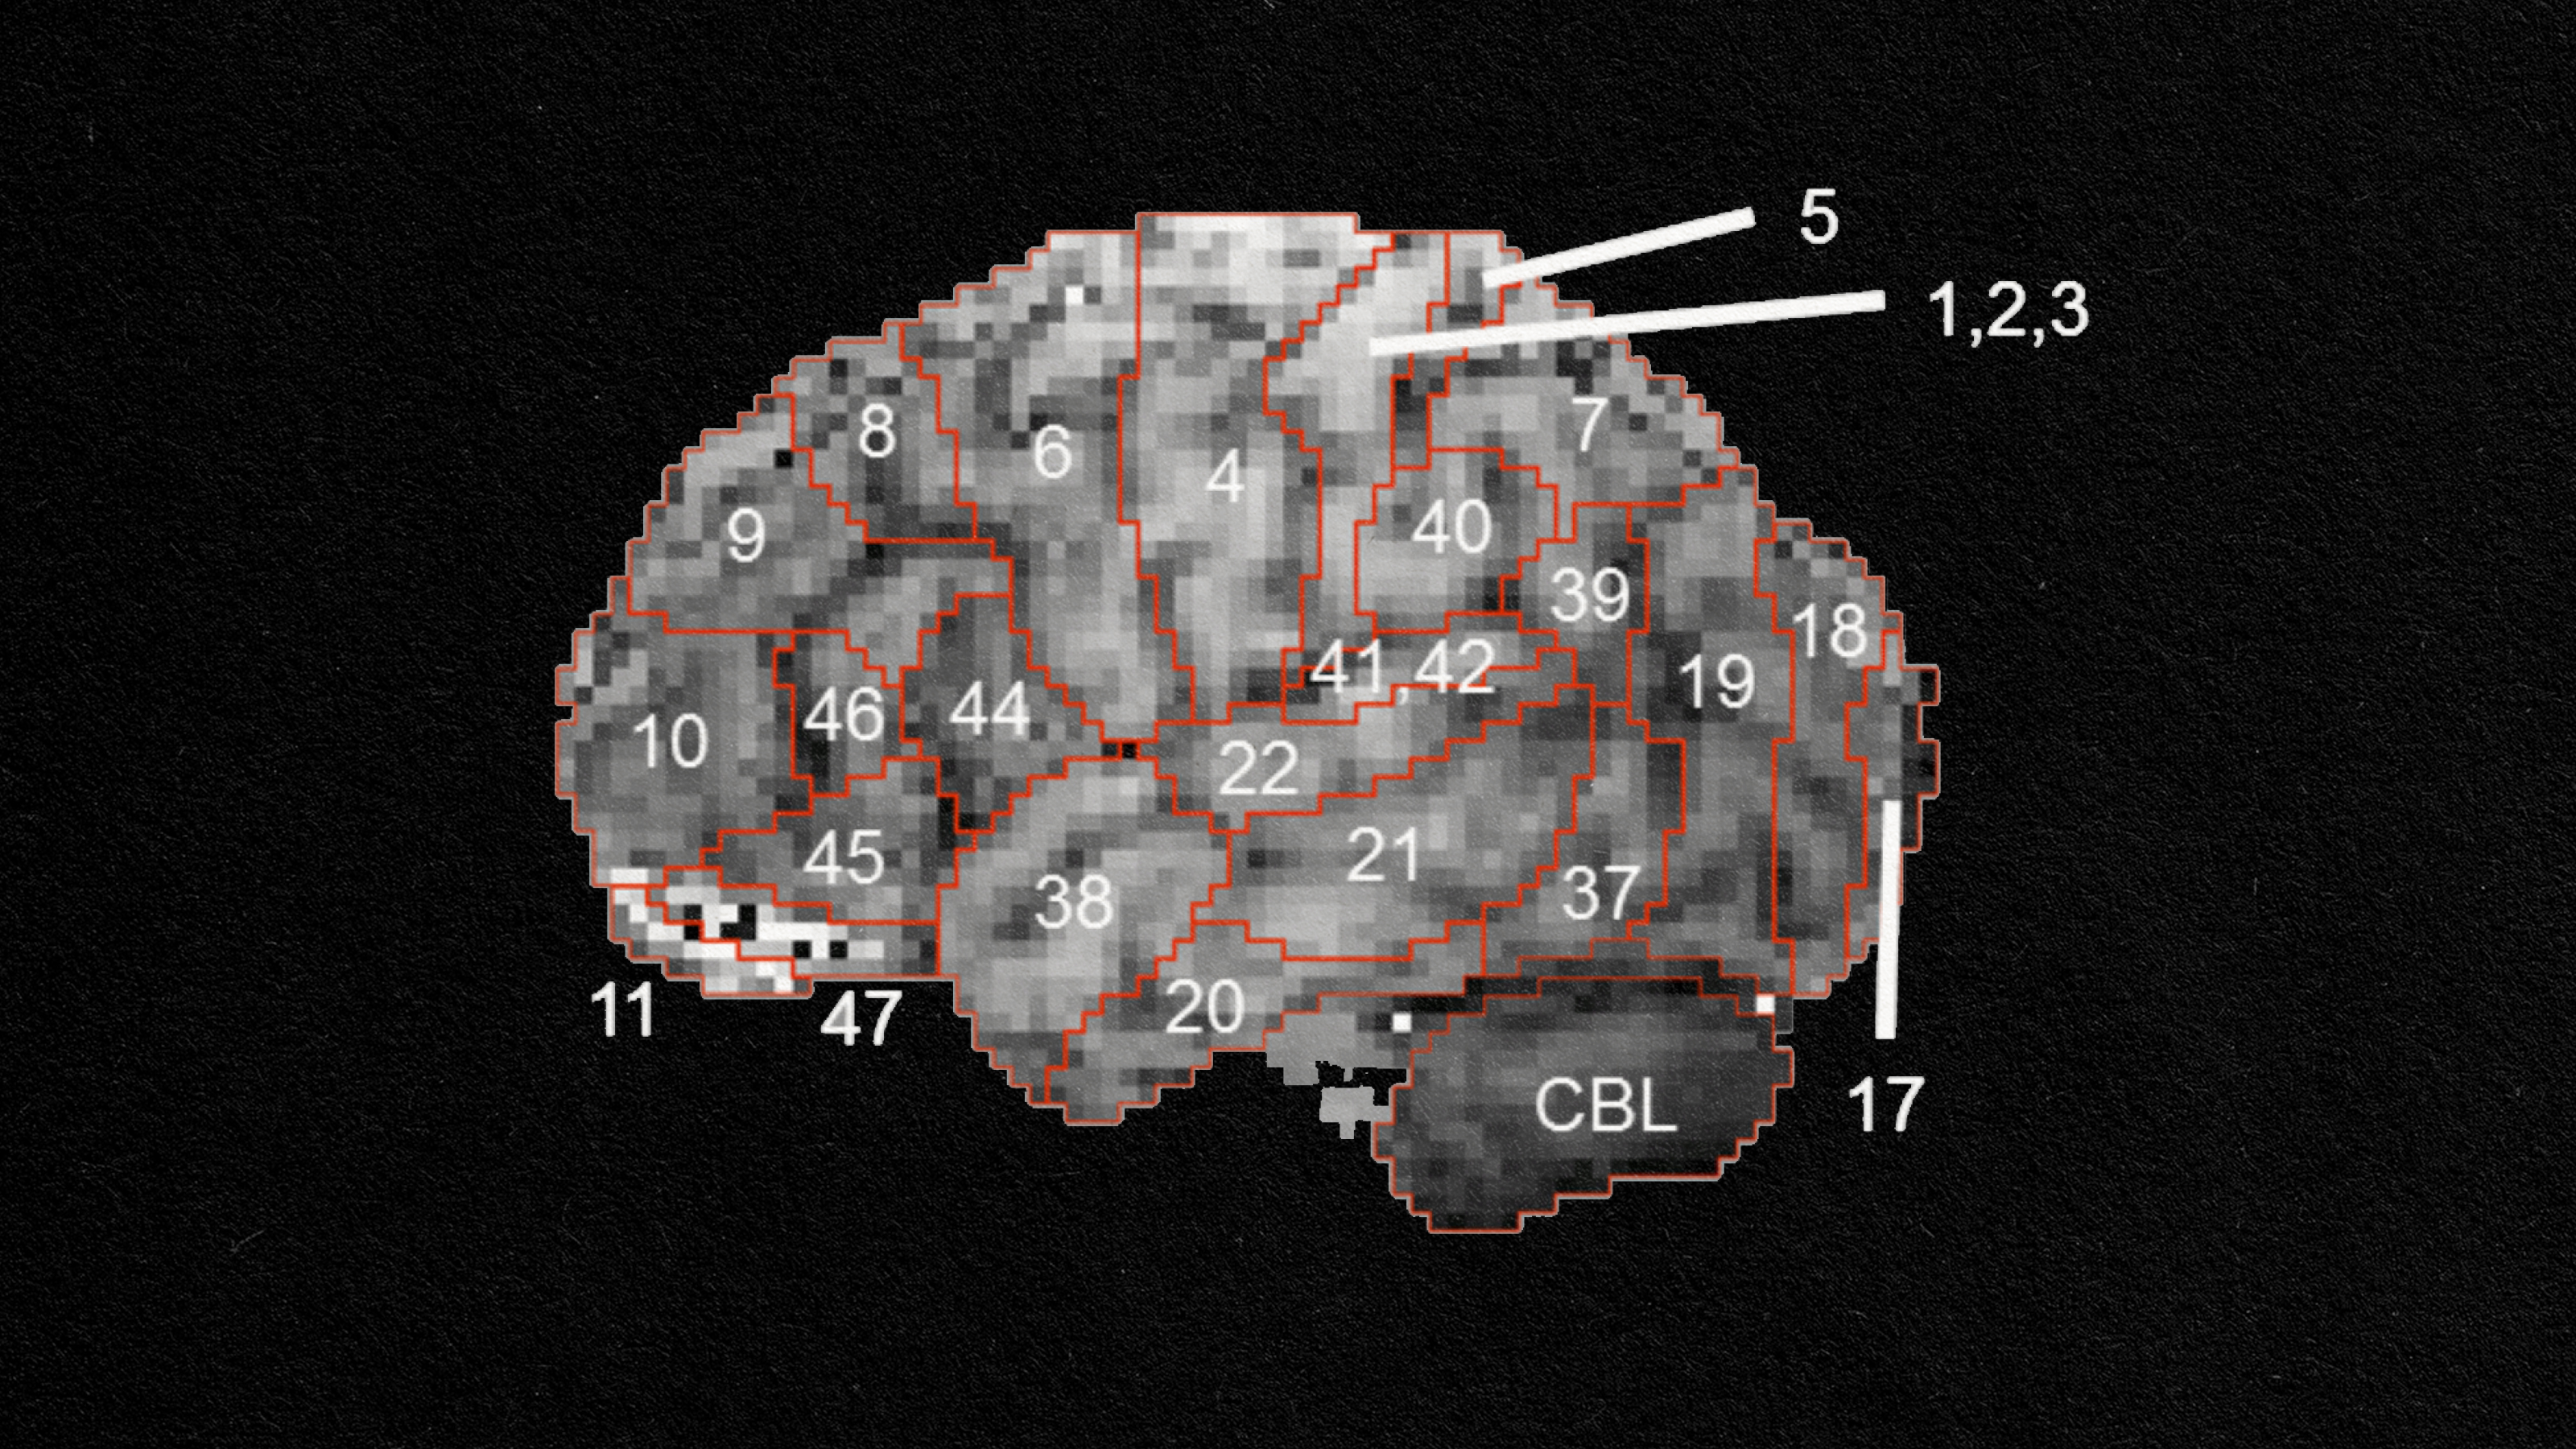 A pixelated image depicting the structure of a human brain.